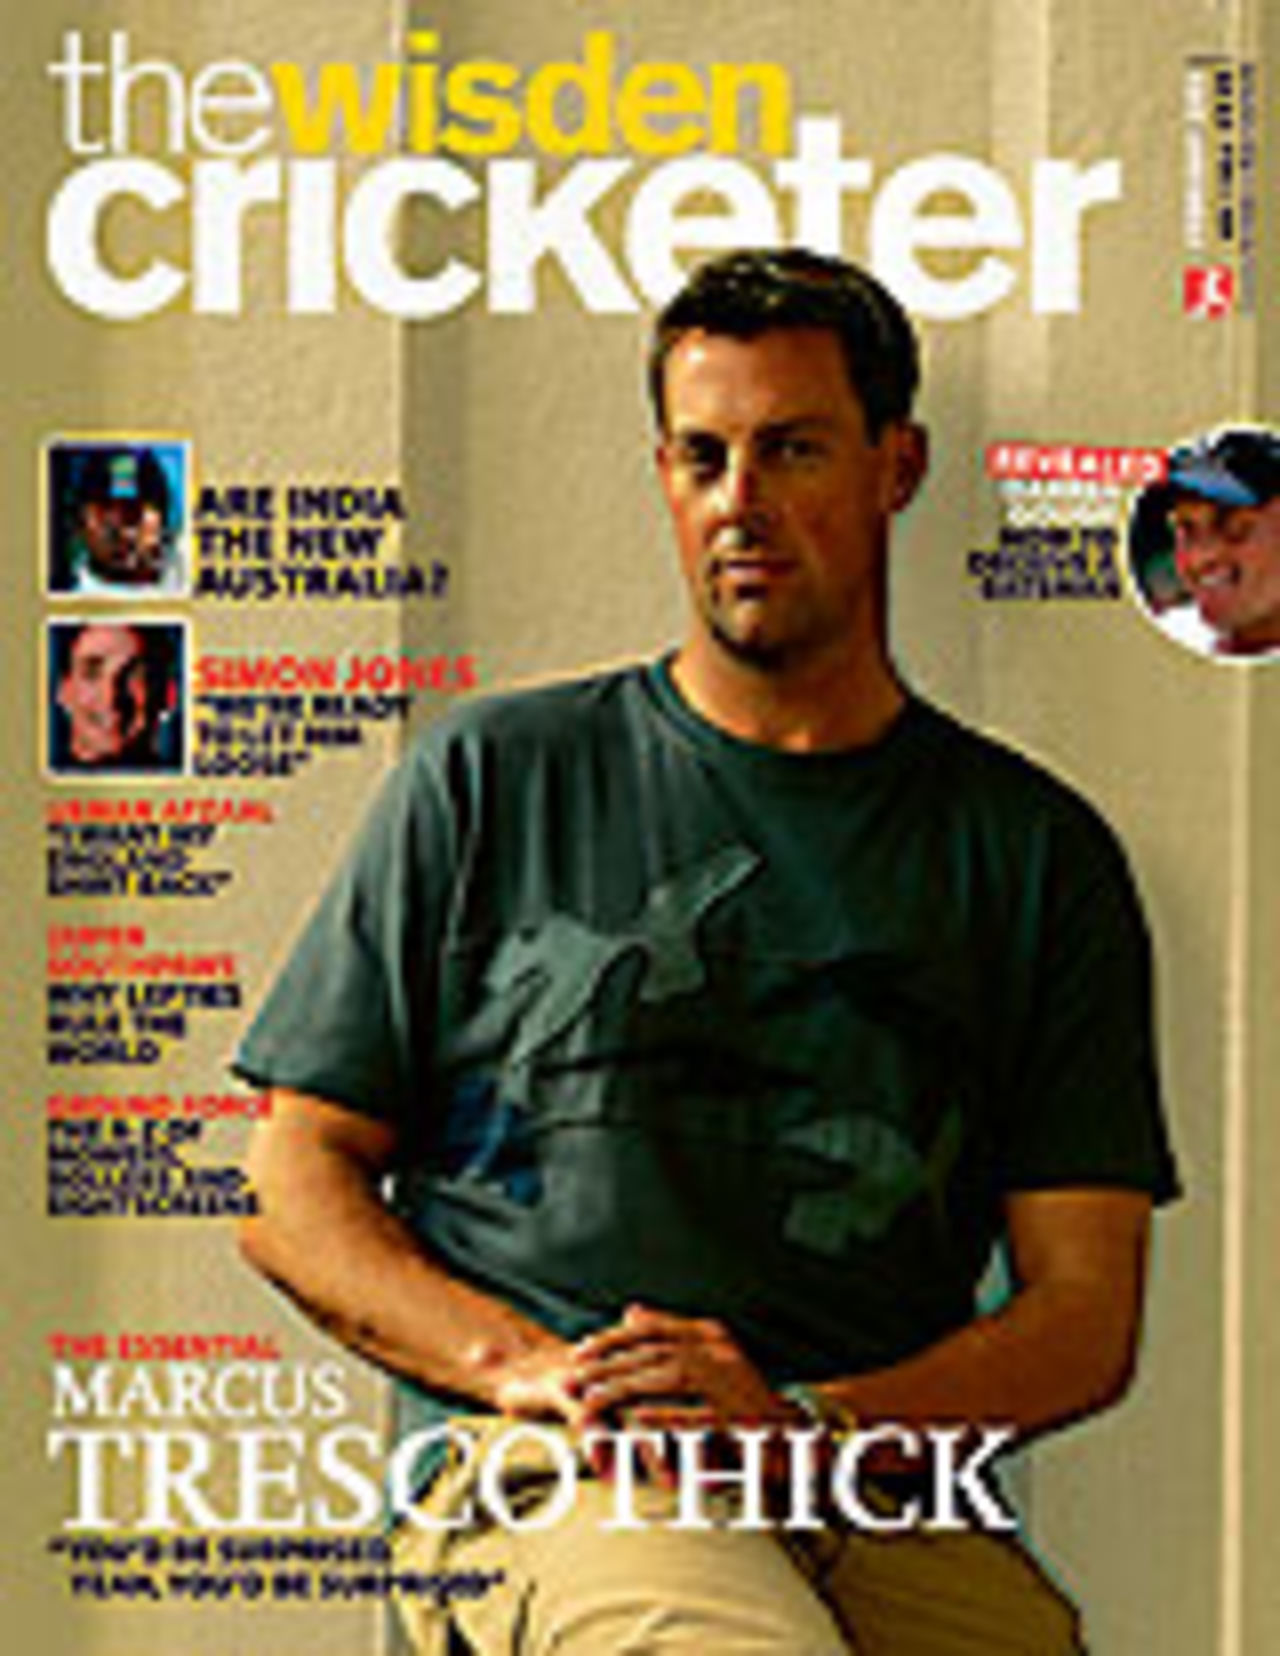 The Wisden Cricketer cover - February 2004